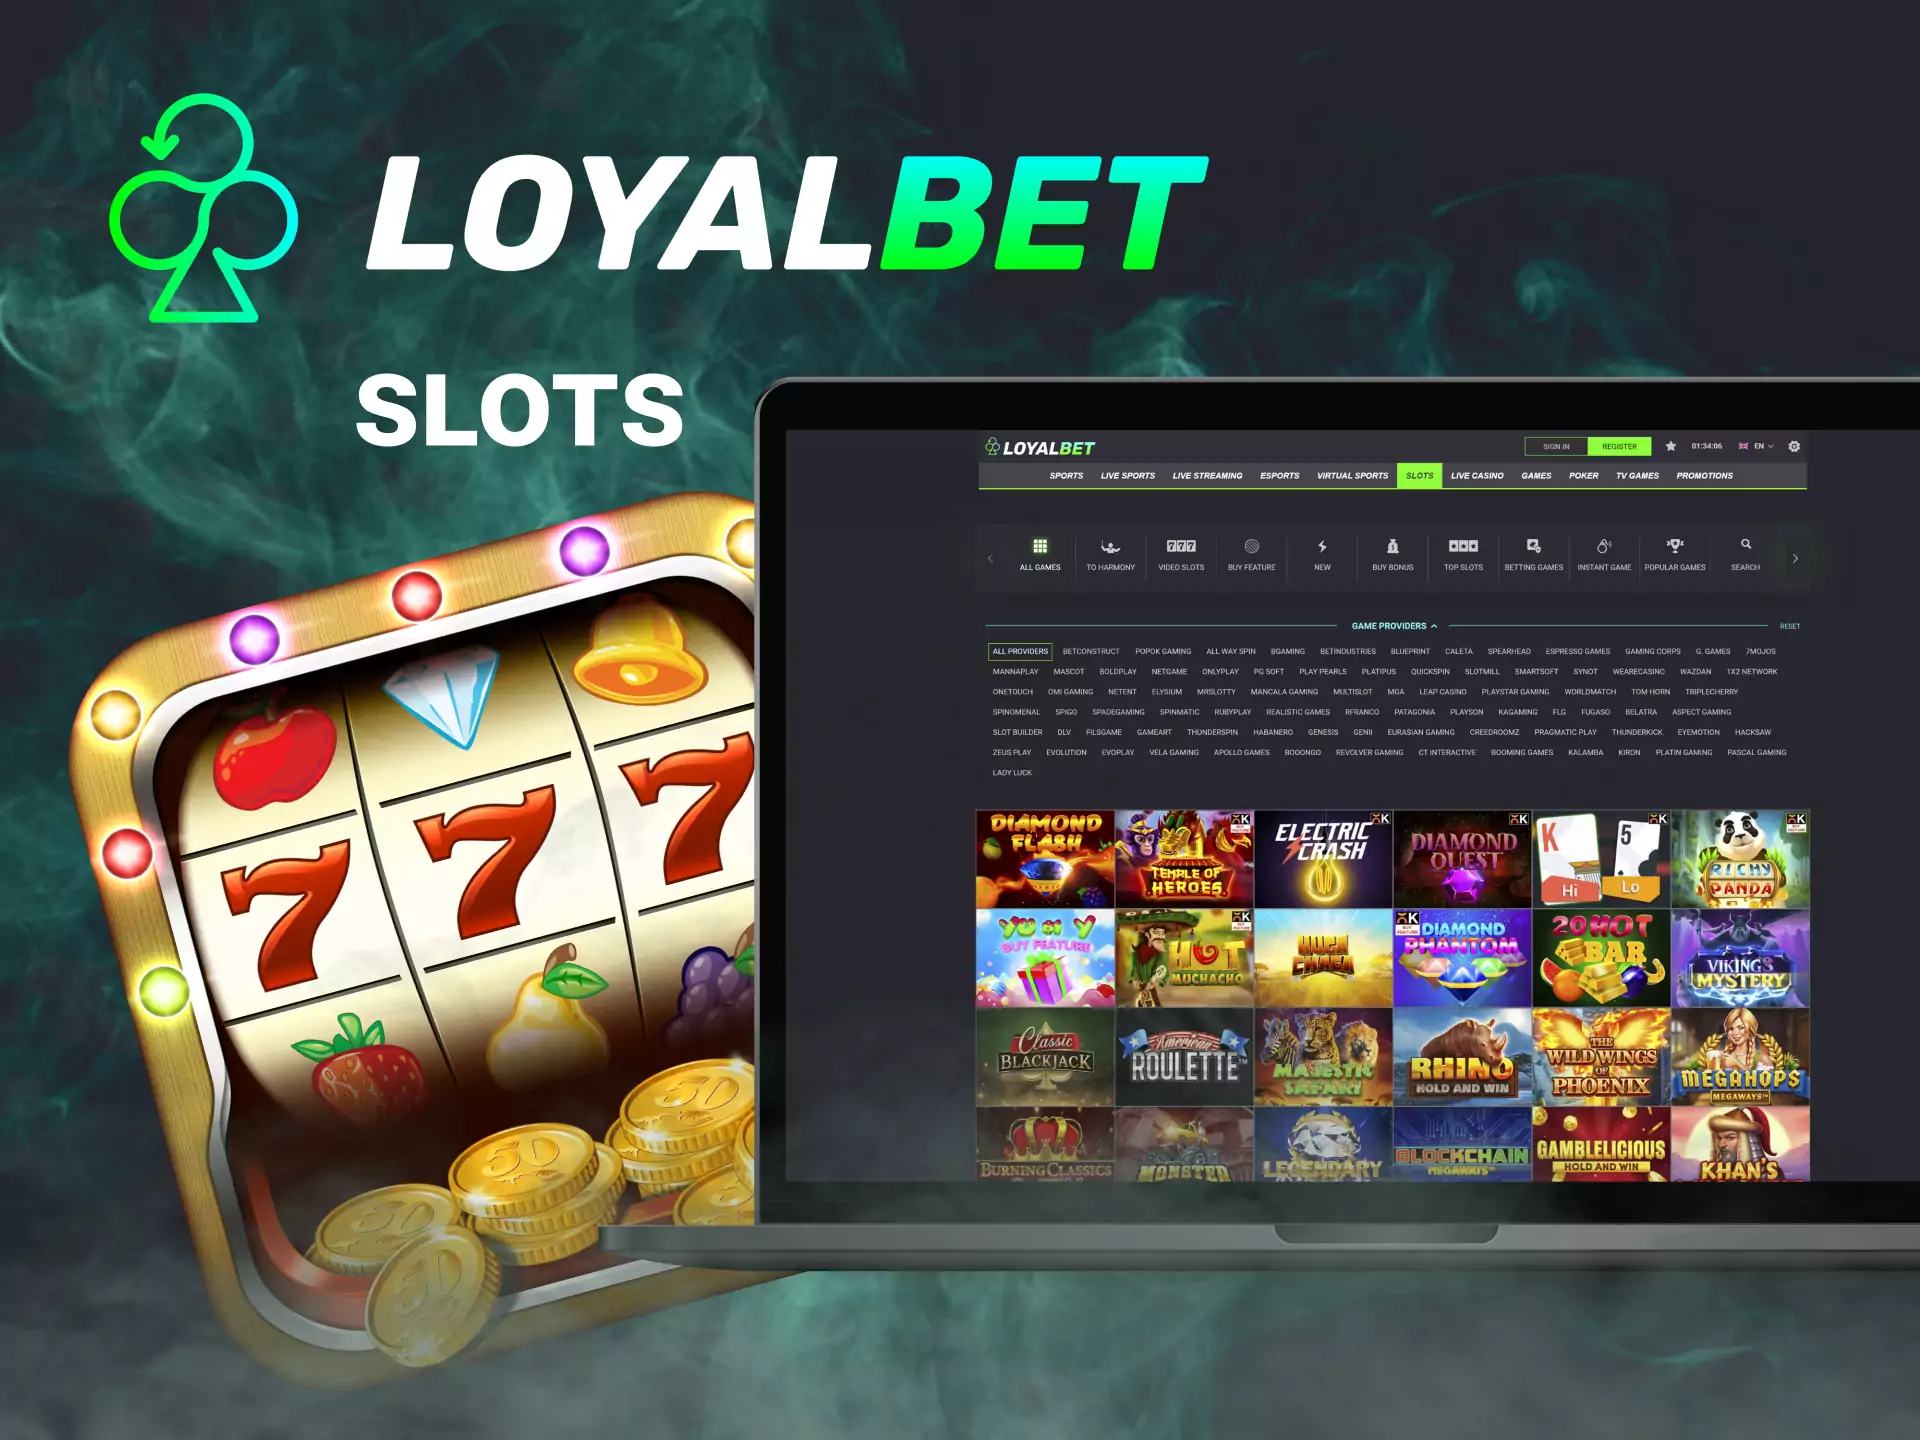 In the Loyalbet Online Casino, there are lots of colourful slots.